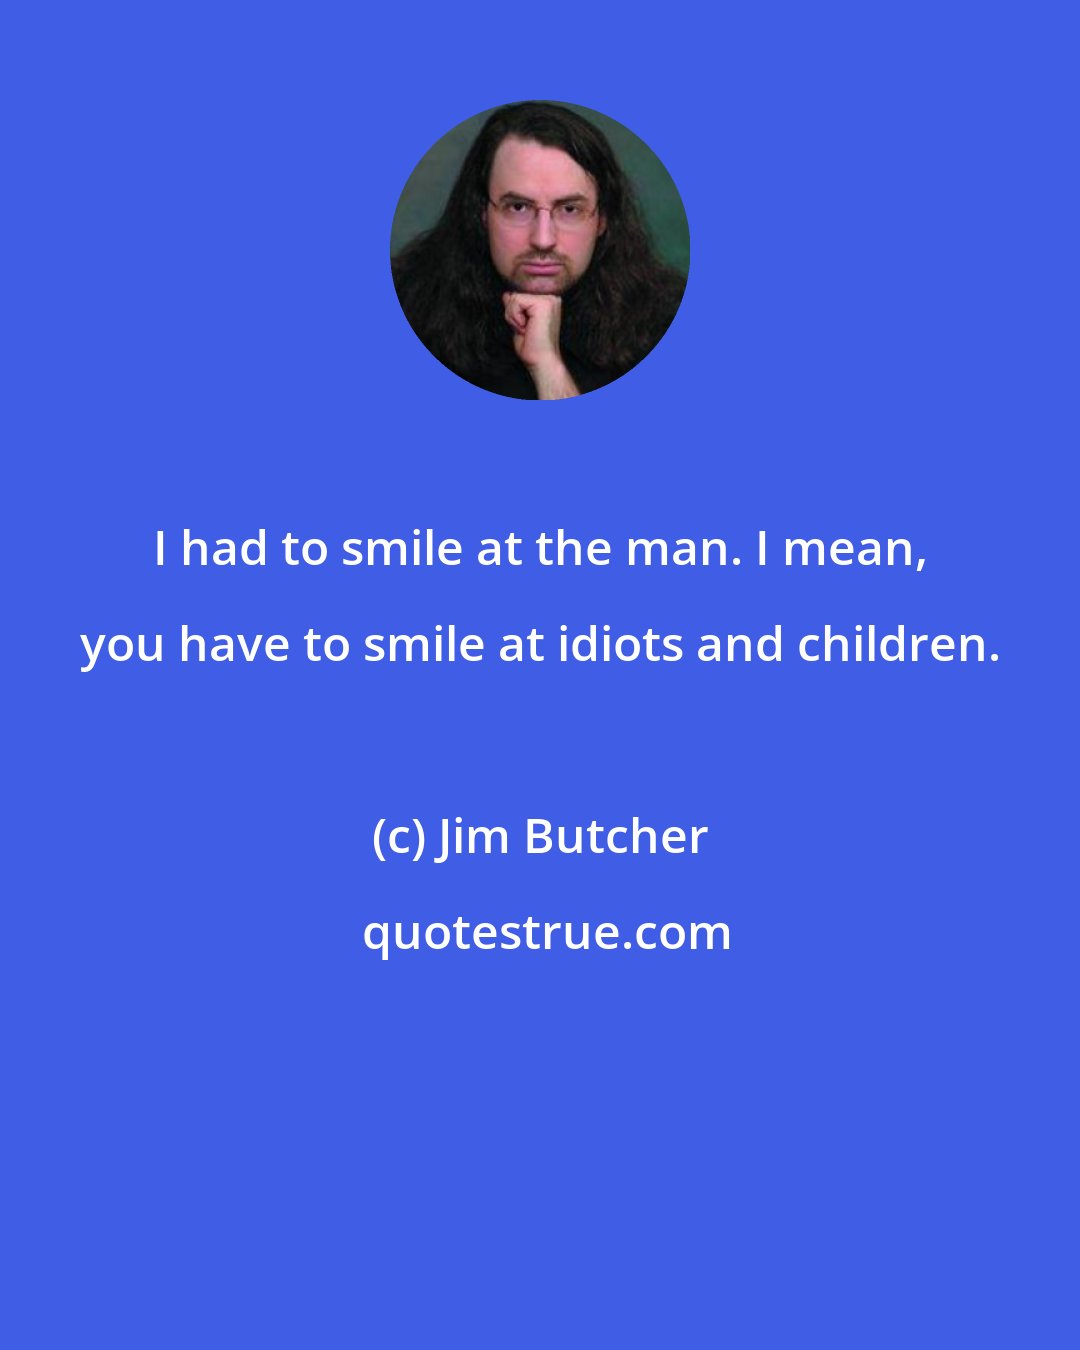 Jim Butcher: I had to smile at the man. I mean, you have to smile at idiots and children.